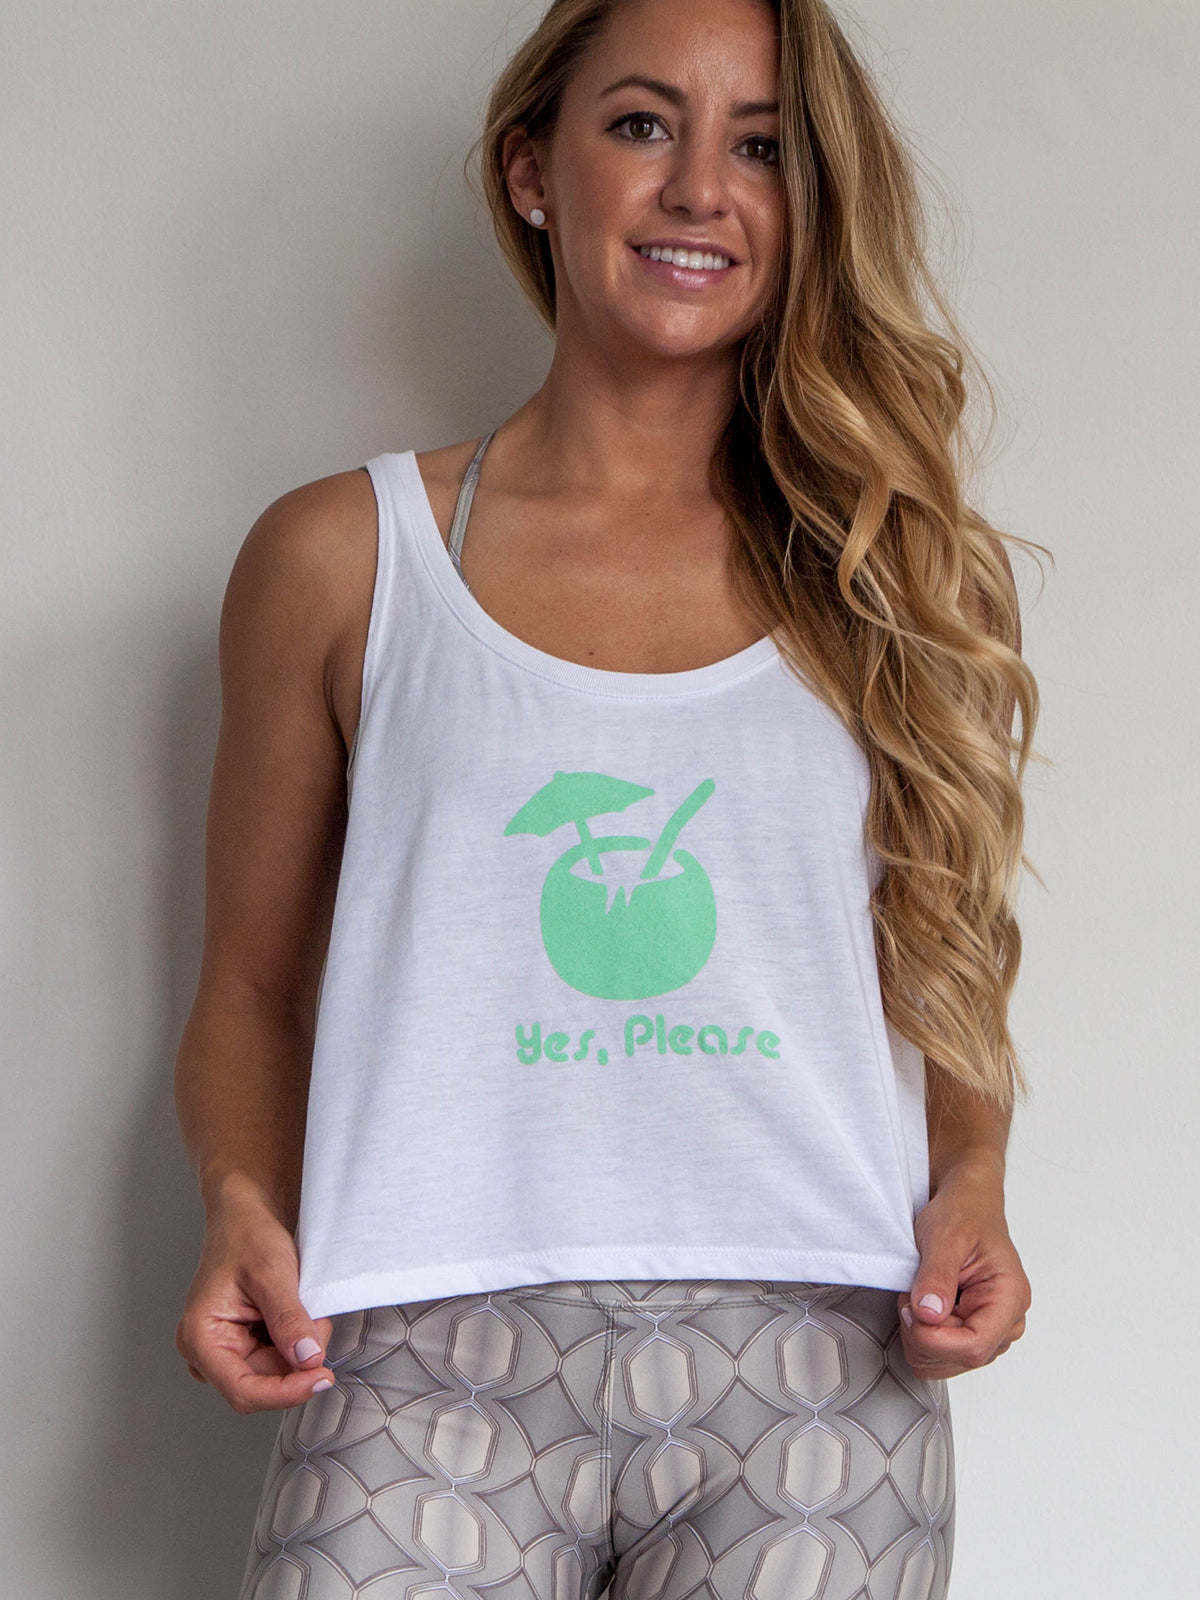 Graphic Tank "Yes Please" Coconut White